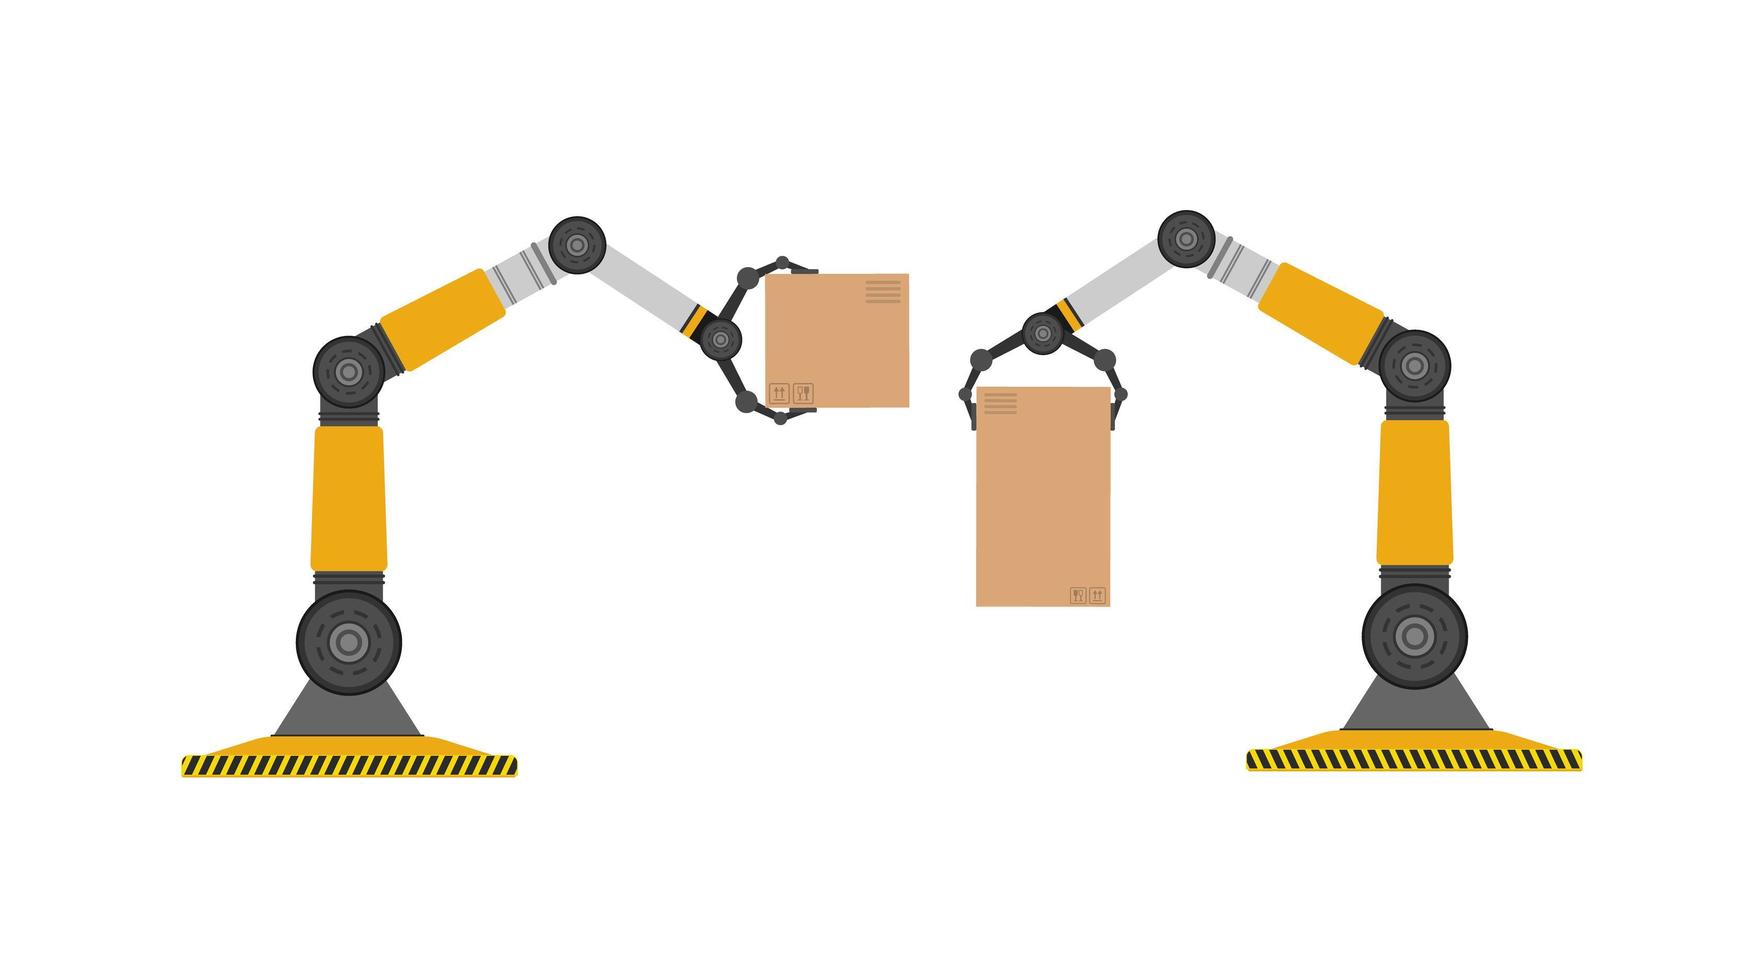 A mechanical robot holds a box. Industrial robotic arm lifts a load. Modern industrial technology. Appliances for manufacturing enterprises. Isolated. Vector. vector